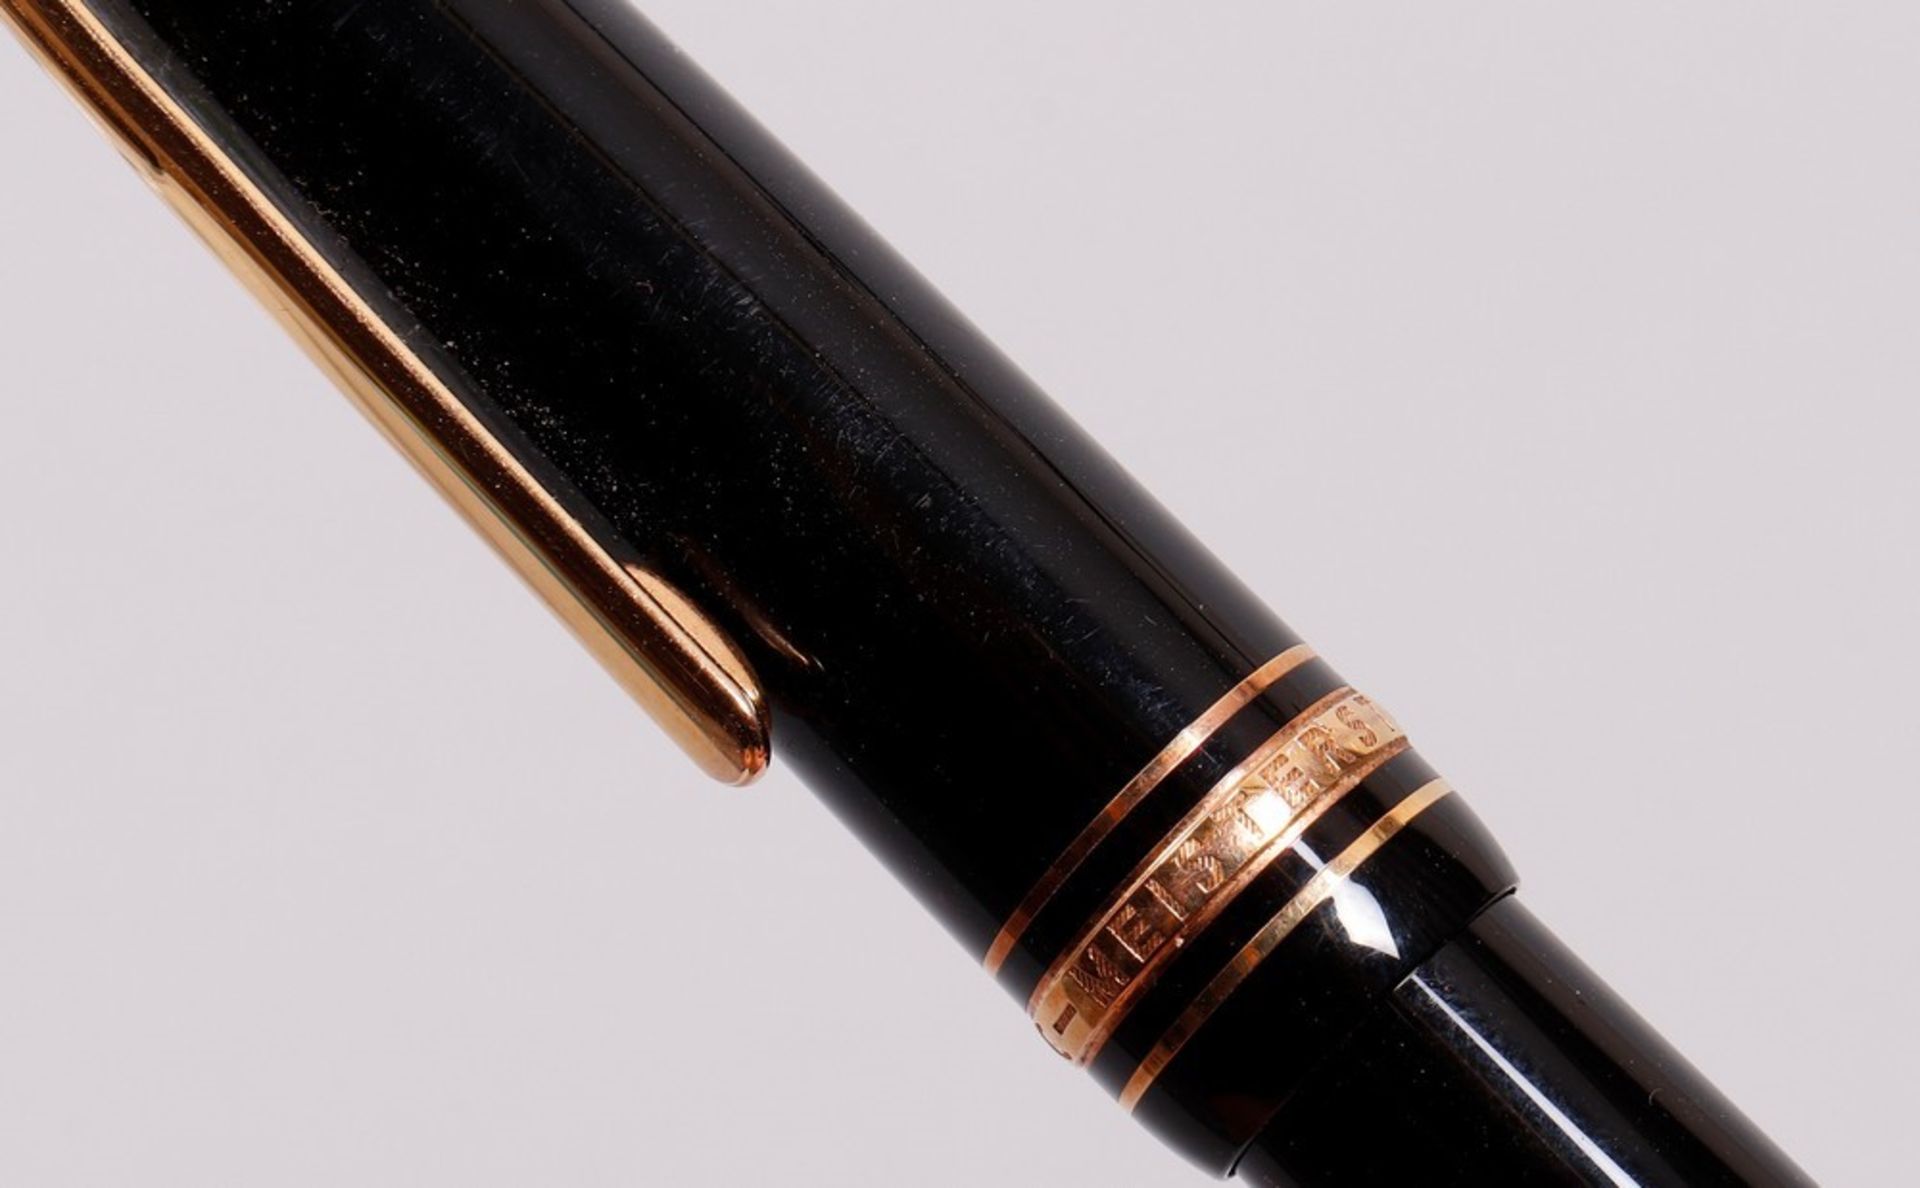 Fountain pen, Montblanc, Meisterstück 146, 90 years Edition Le Grand - Image 4 of 5